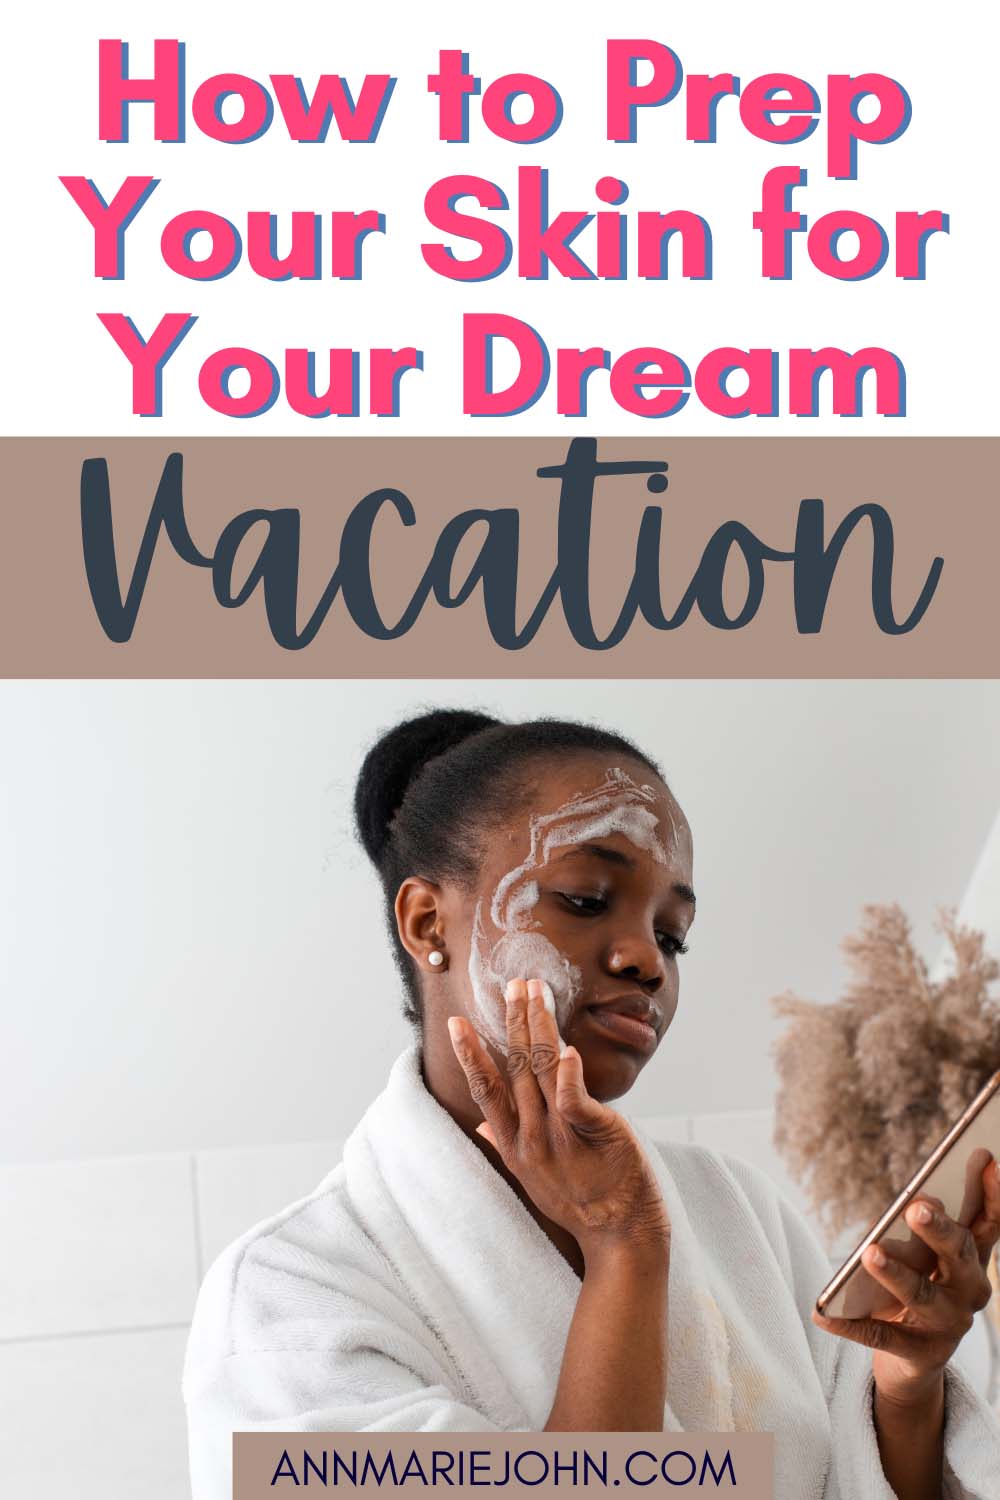 How to Prep Your Skin for Your Dream Vacation